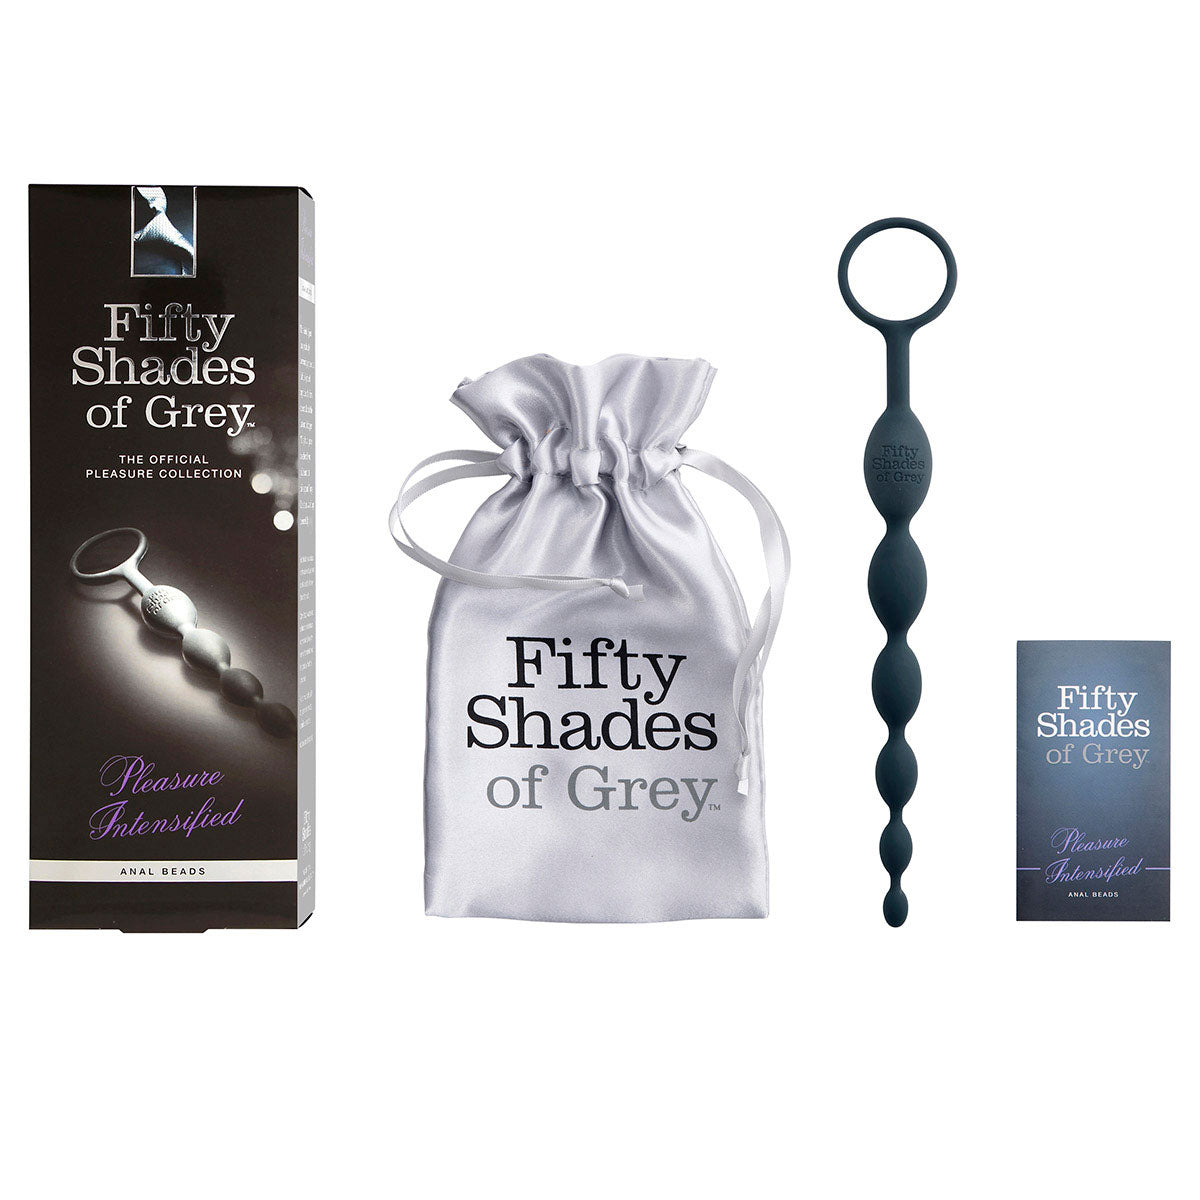 Fifty Shades - Pleasure Intensified Anal Beads Intimates Adult Boutique